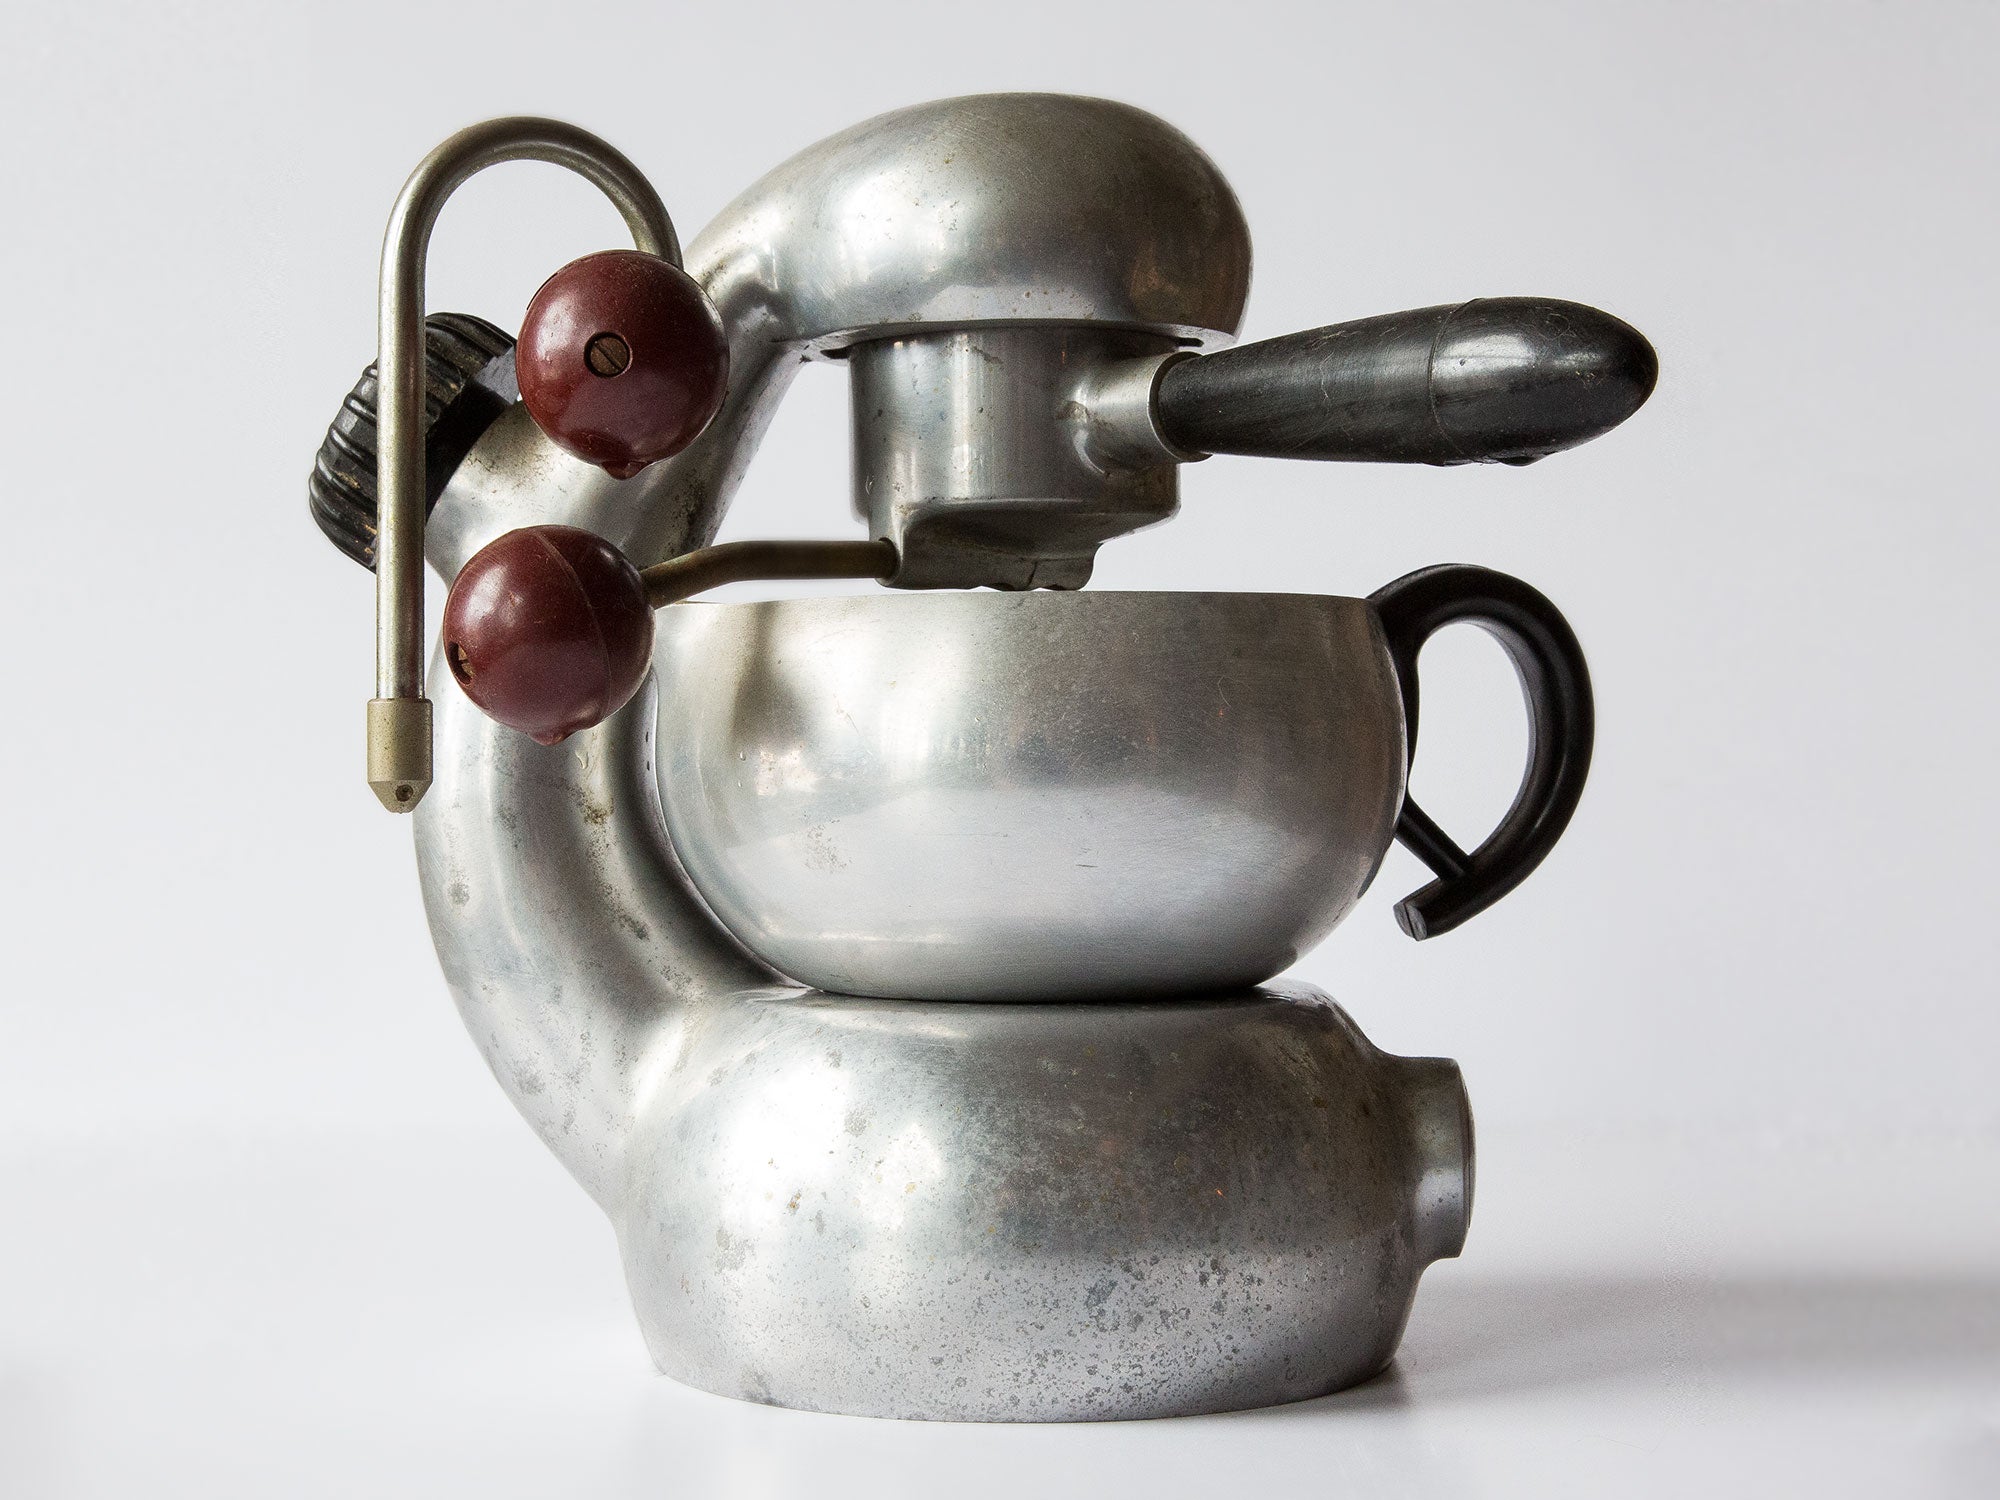 Collections: John McCormick's Vintage Espresso Makers